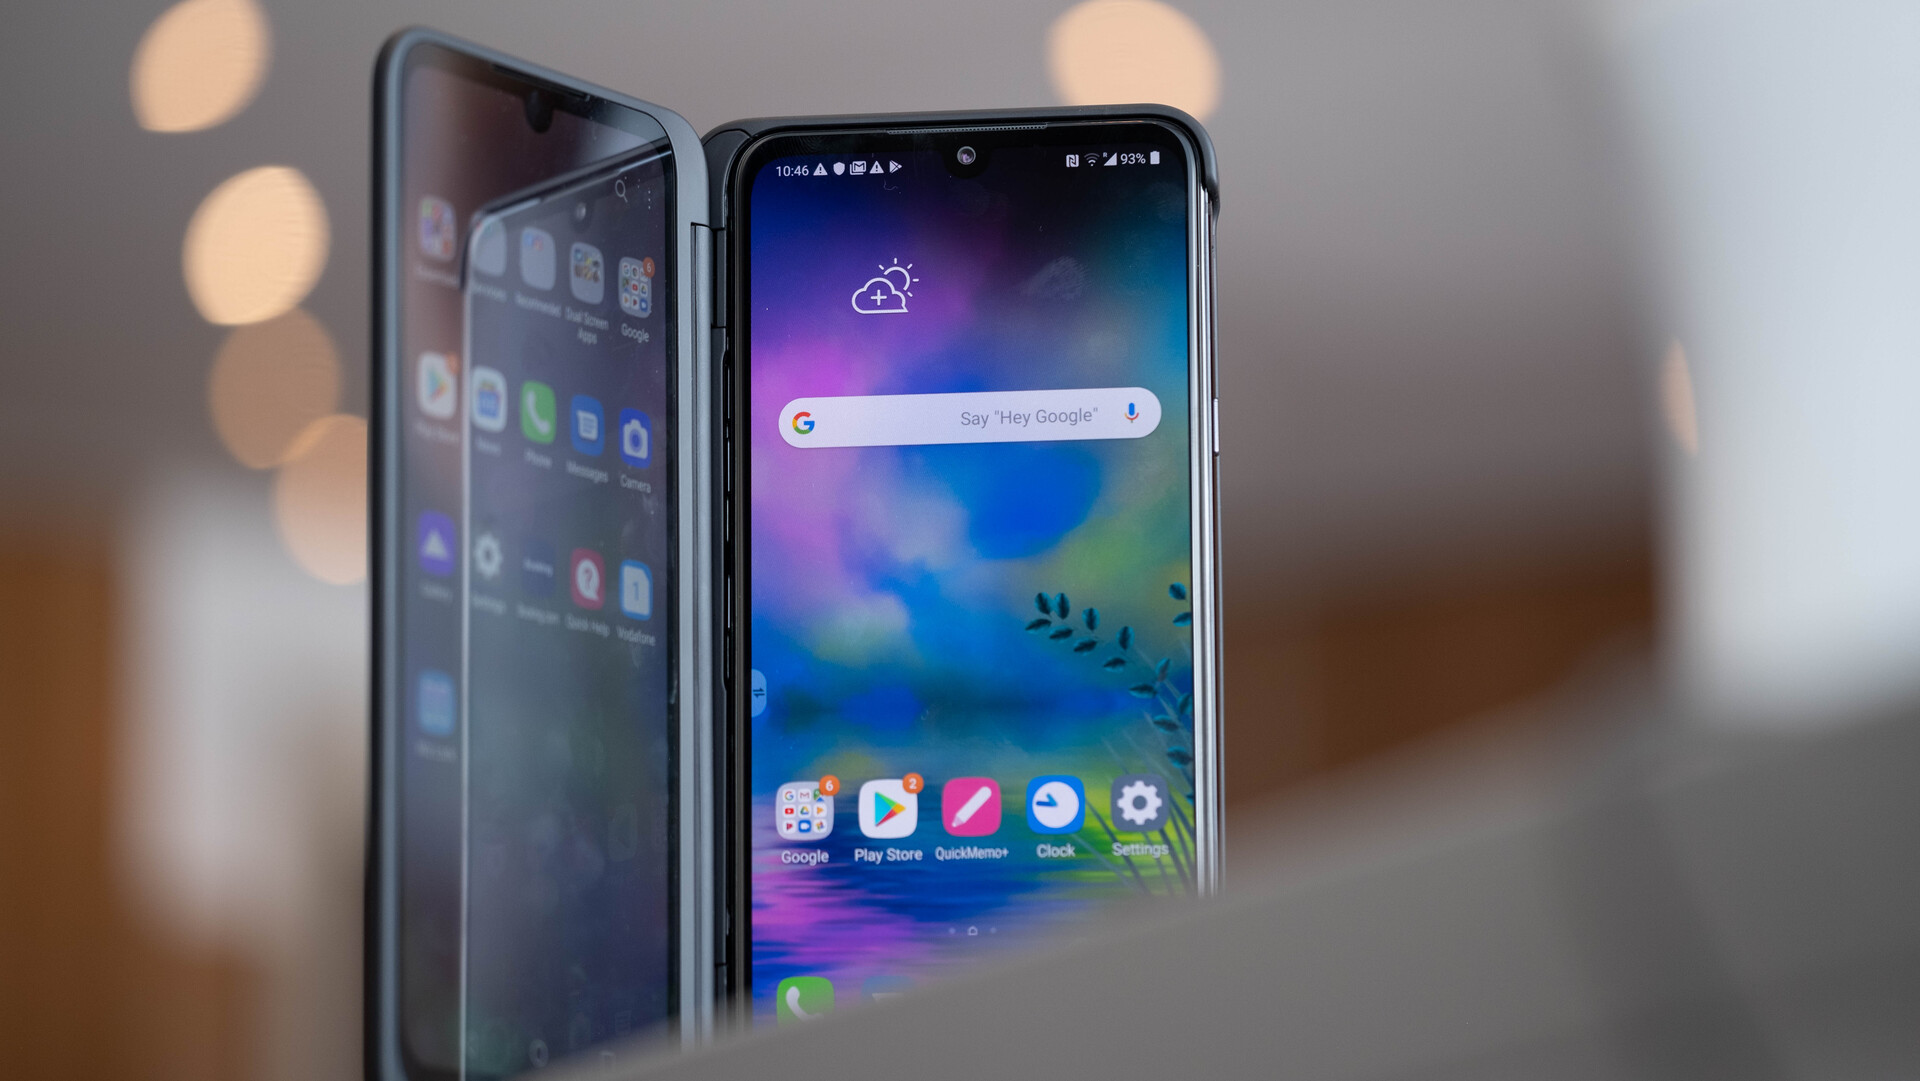 LG G8X ThinQ waterproof phone with Snapdragon 855 chipset